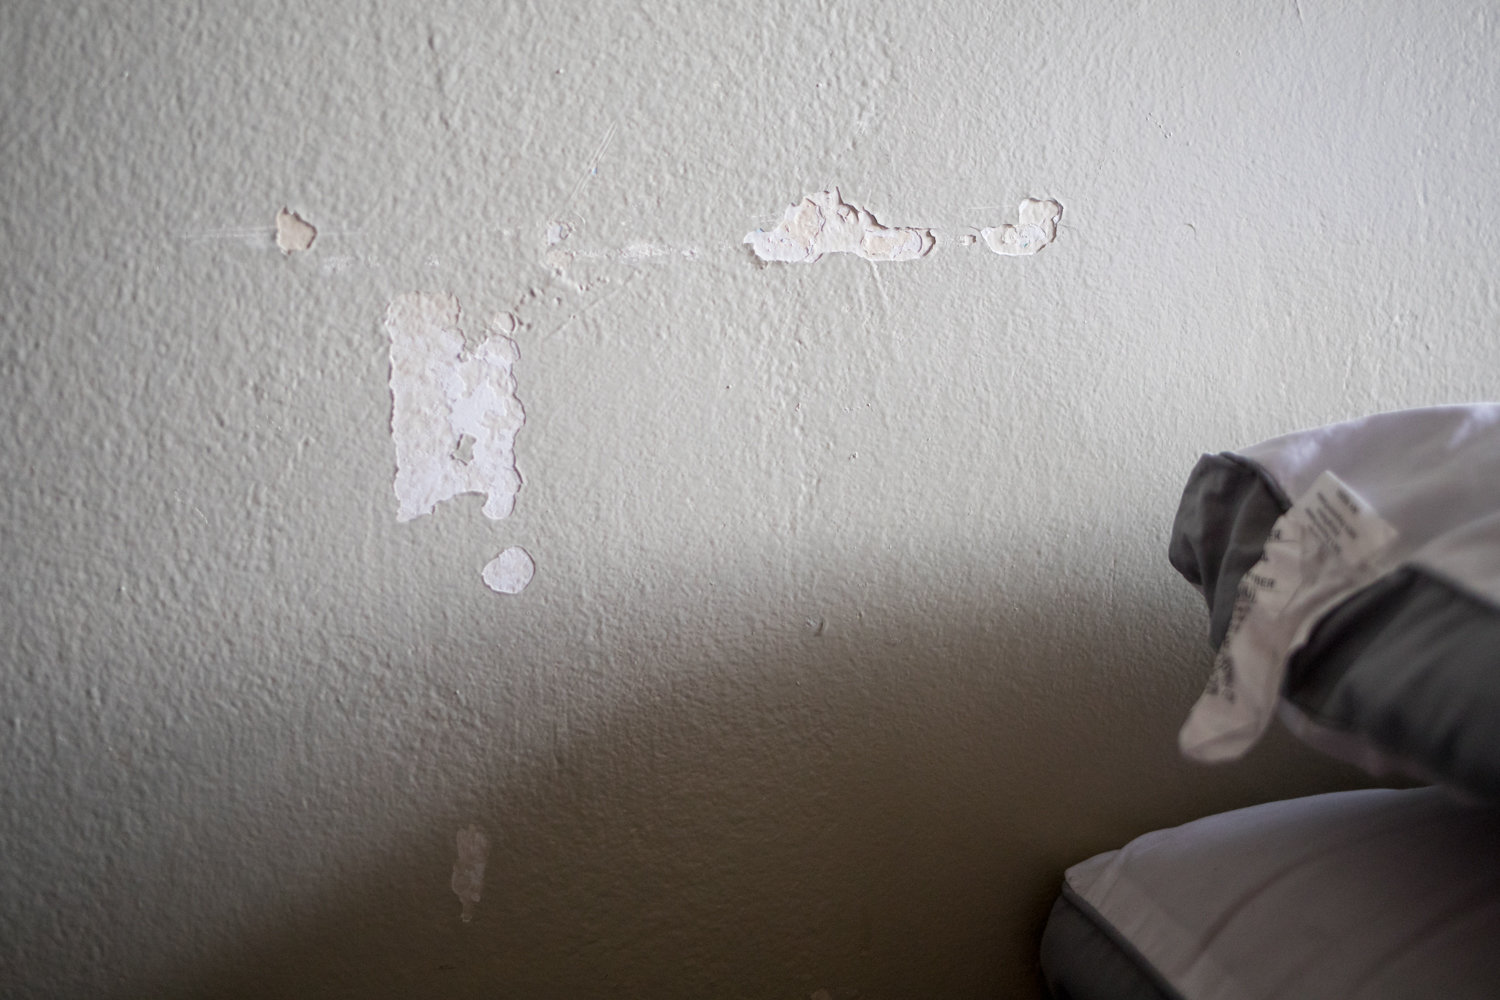 Chipping paint creates airborne dust that can be hazardous if inhaled. And if the paint is lead-based, the risk is much higher, experts have said. The New York City Housing Authority has yet to test all its facilities for lead paint.